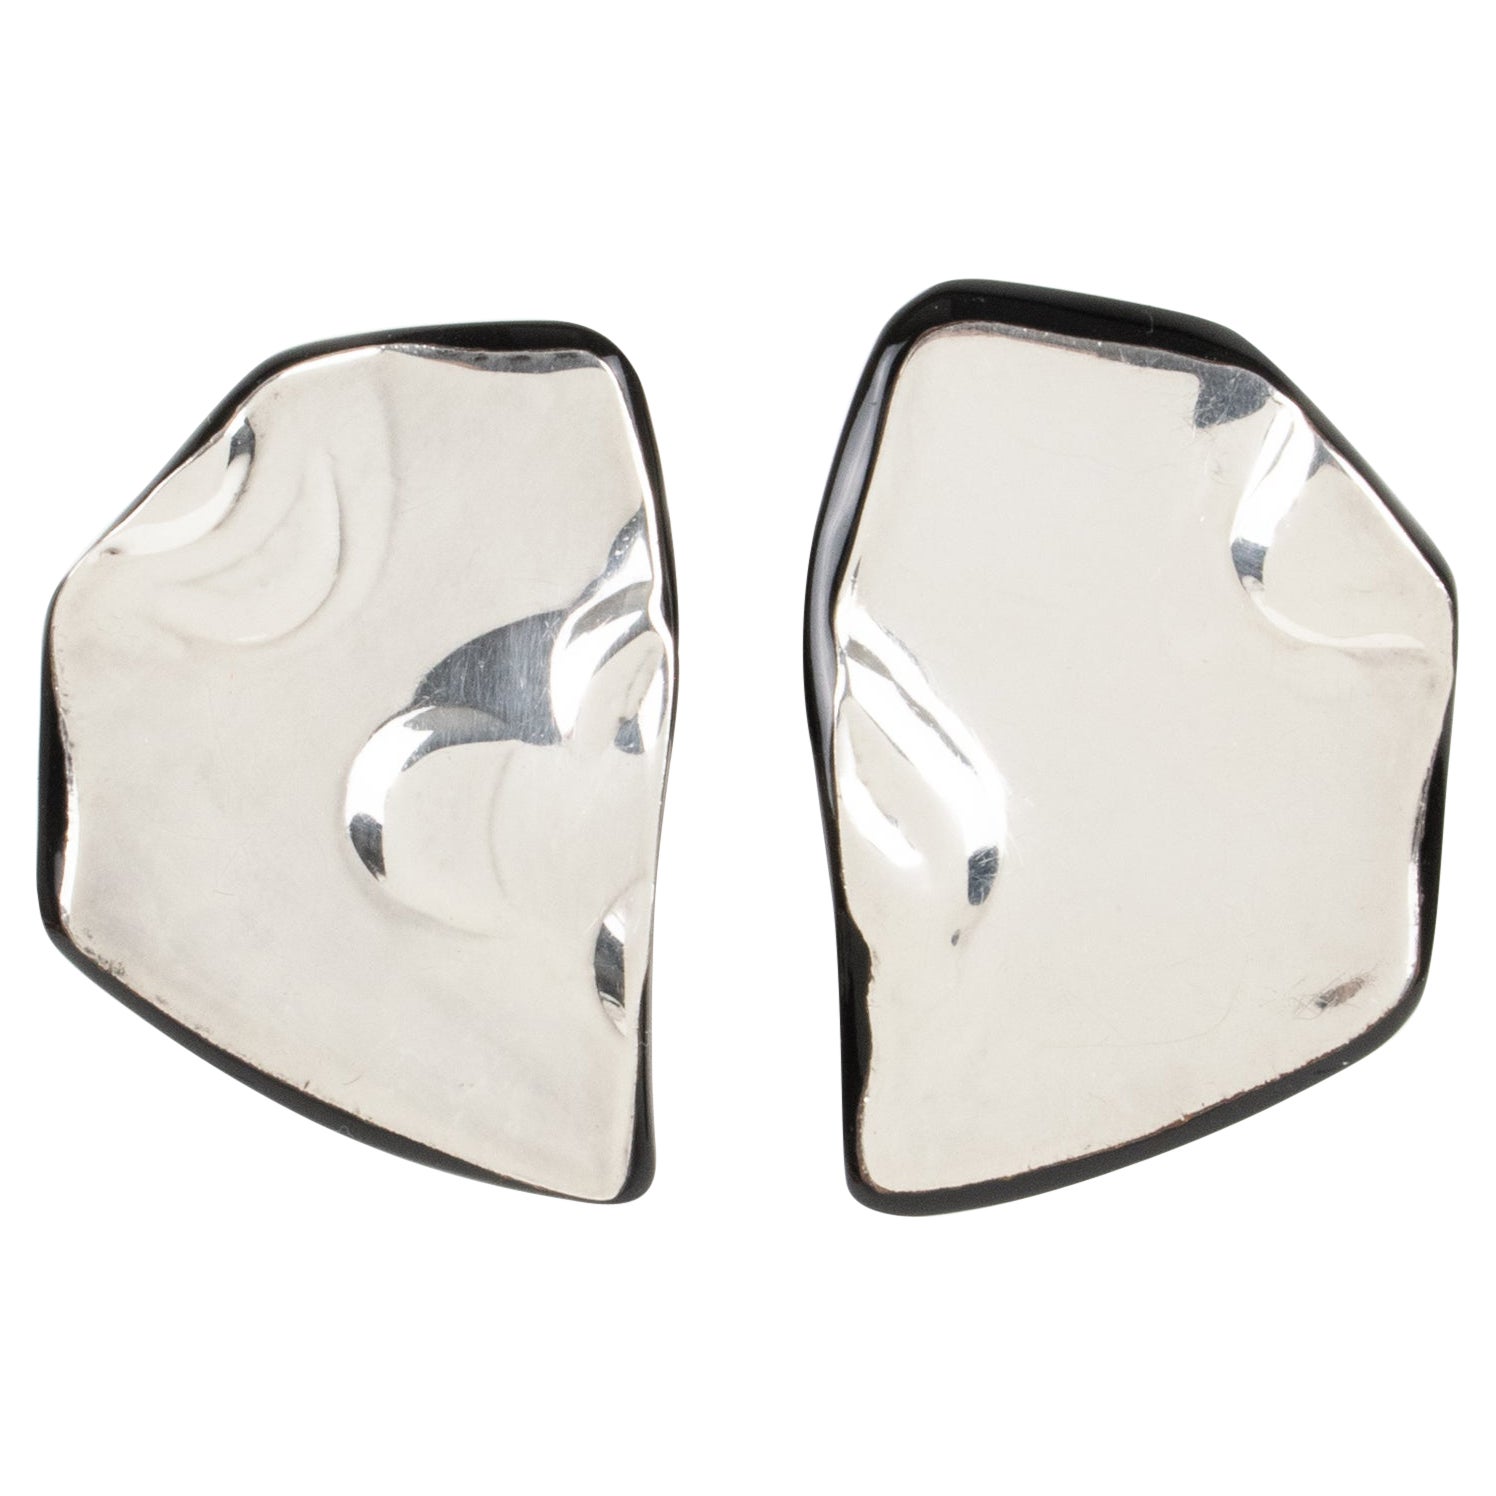 Anne and Frank Vigneri Black Lucite and Sterling Silver Freeform Clip Earrings For Sale